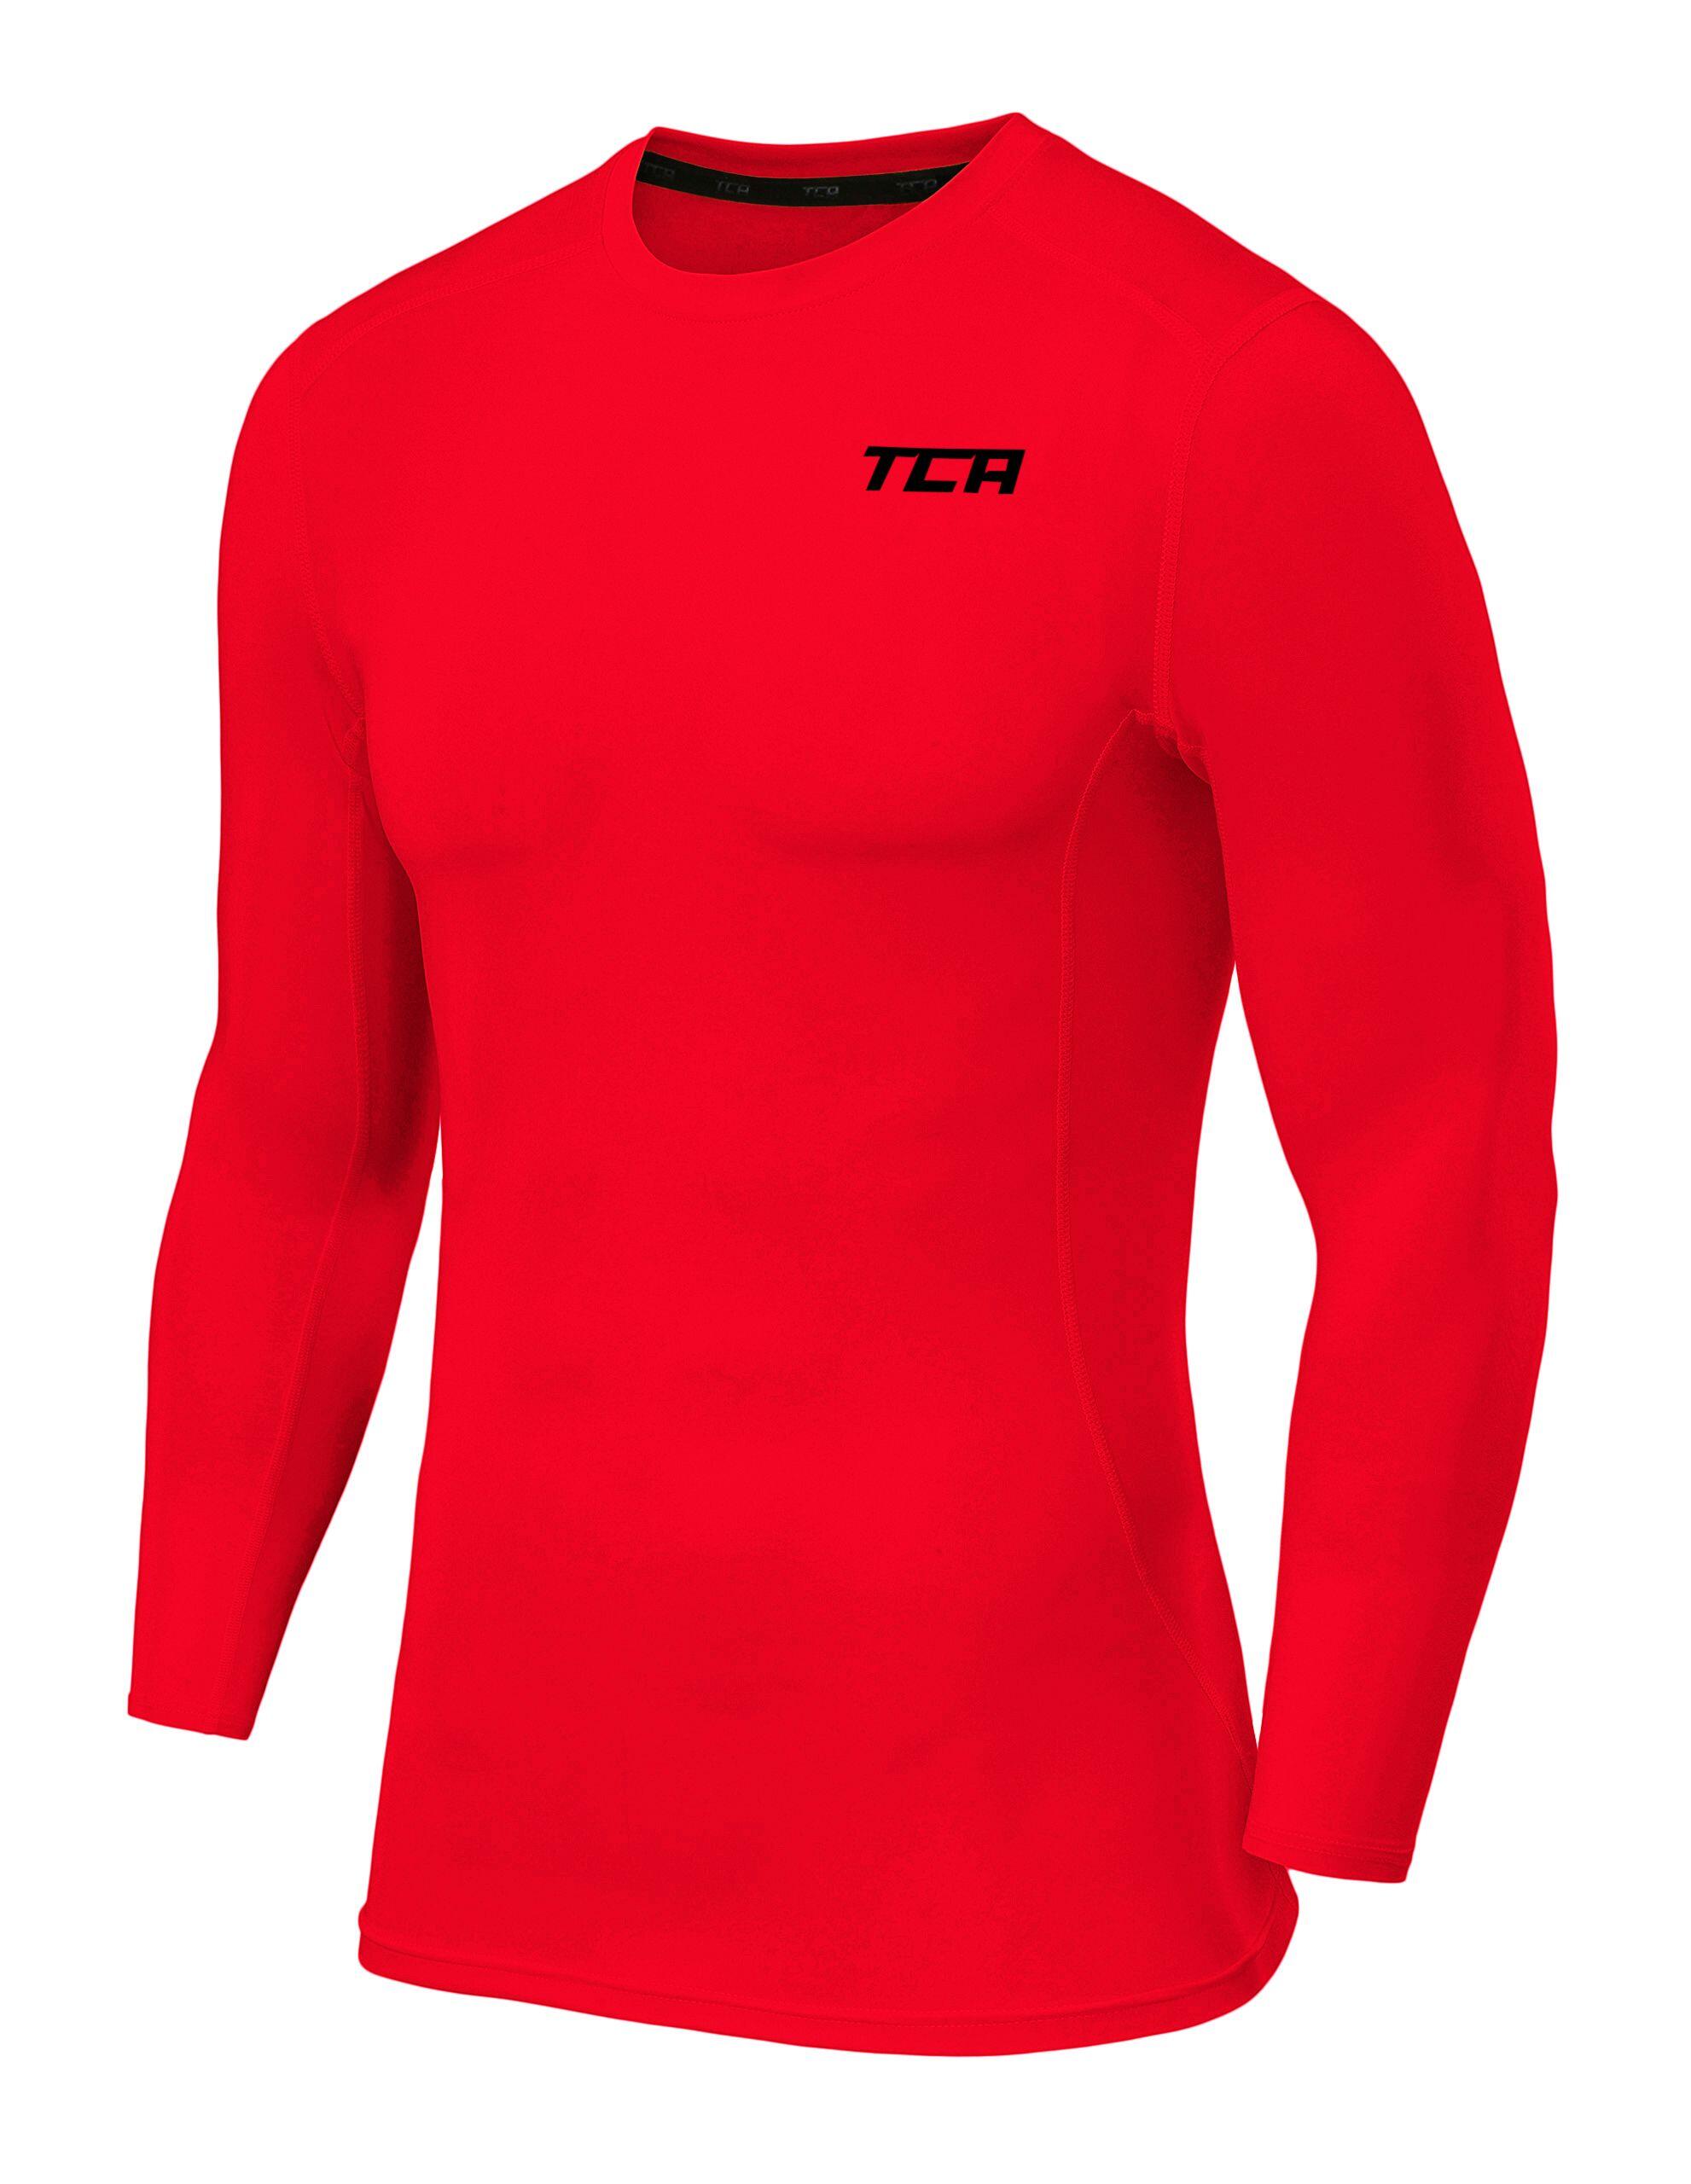 Men's Power Base Layer Compression Long Sleeve Top - High Risk Red 2/5